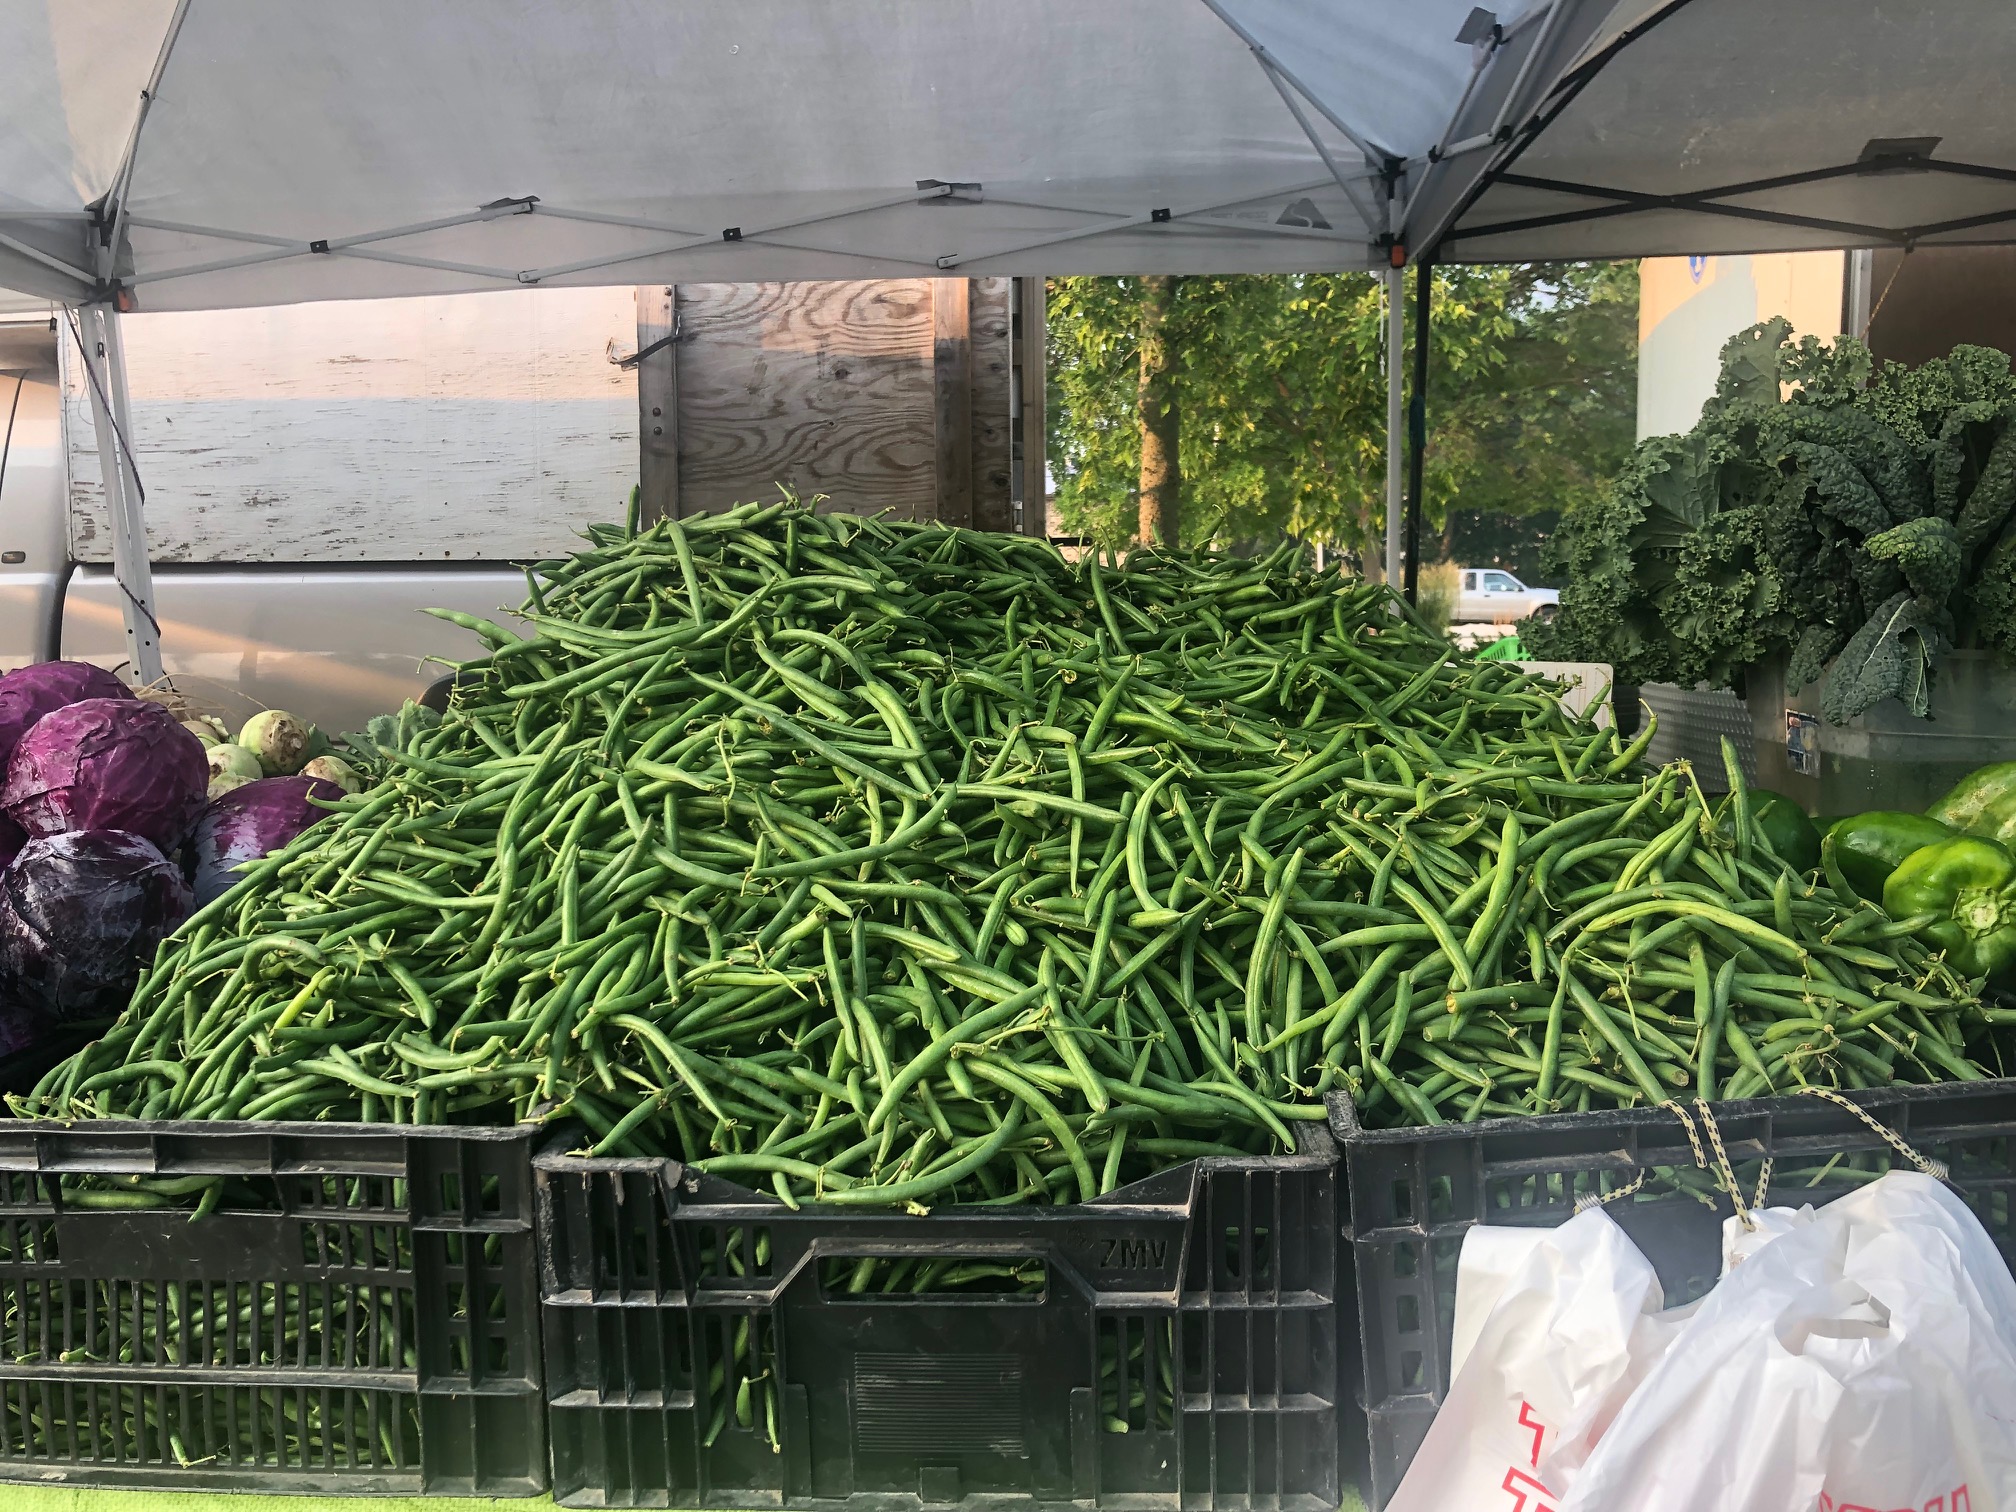 In two giant black plastic containers, a mountain of fresh green beans sits waiting to be sold at the farmers' market. Photo by Alyssa Buckley.